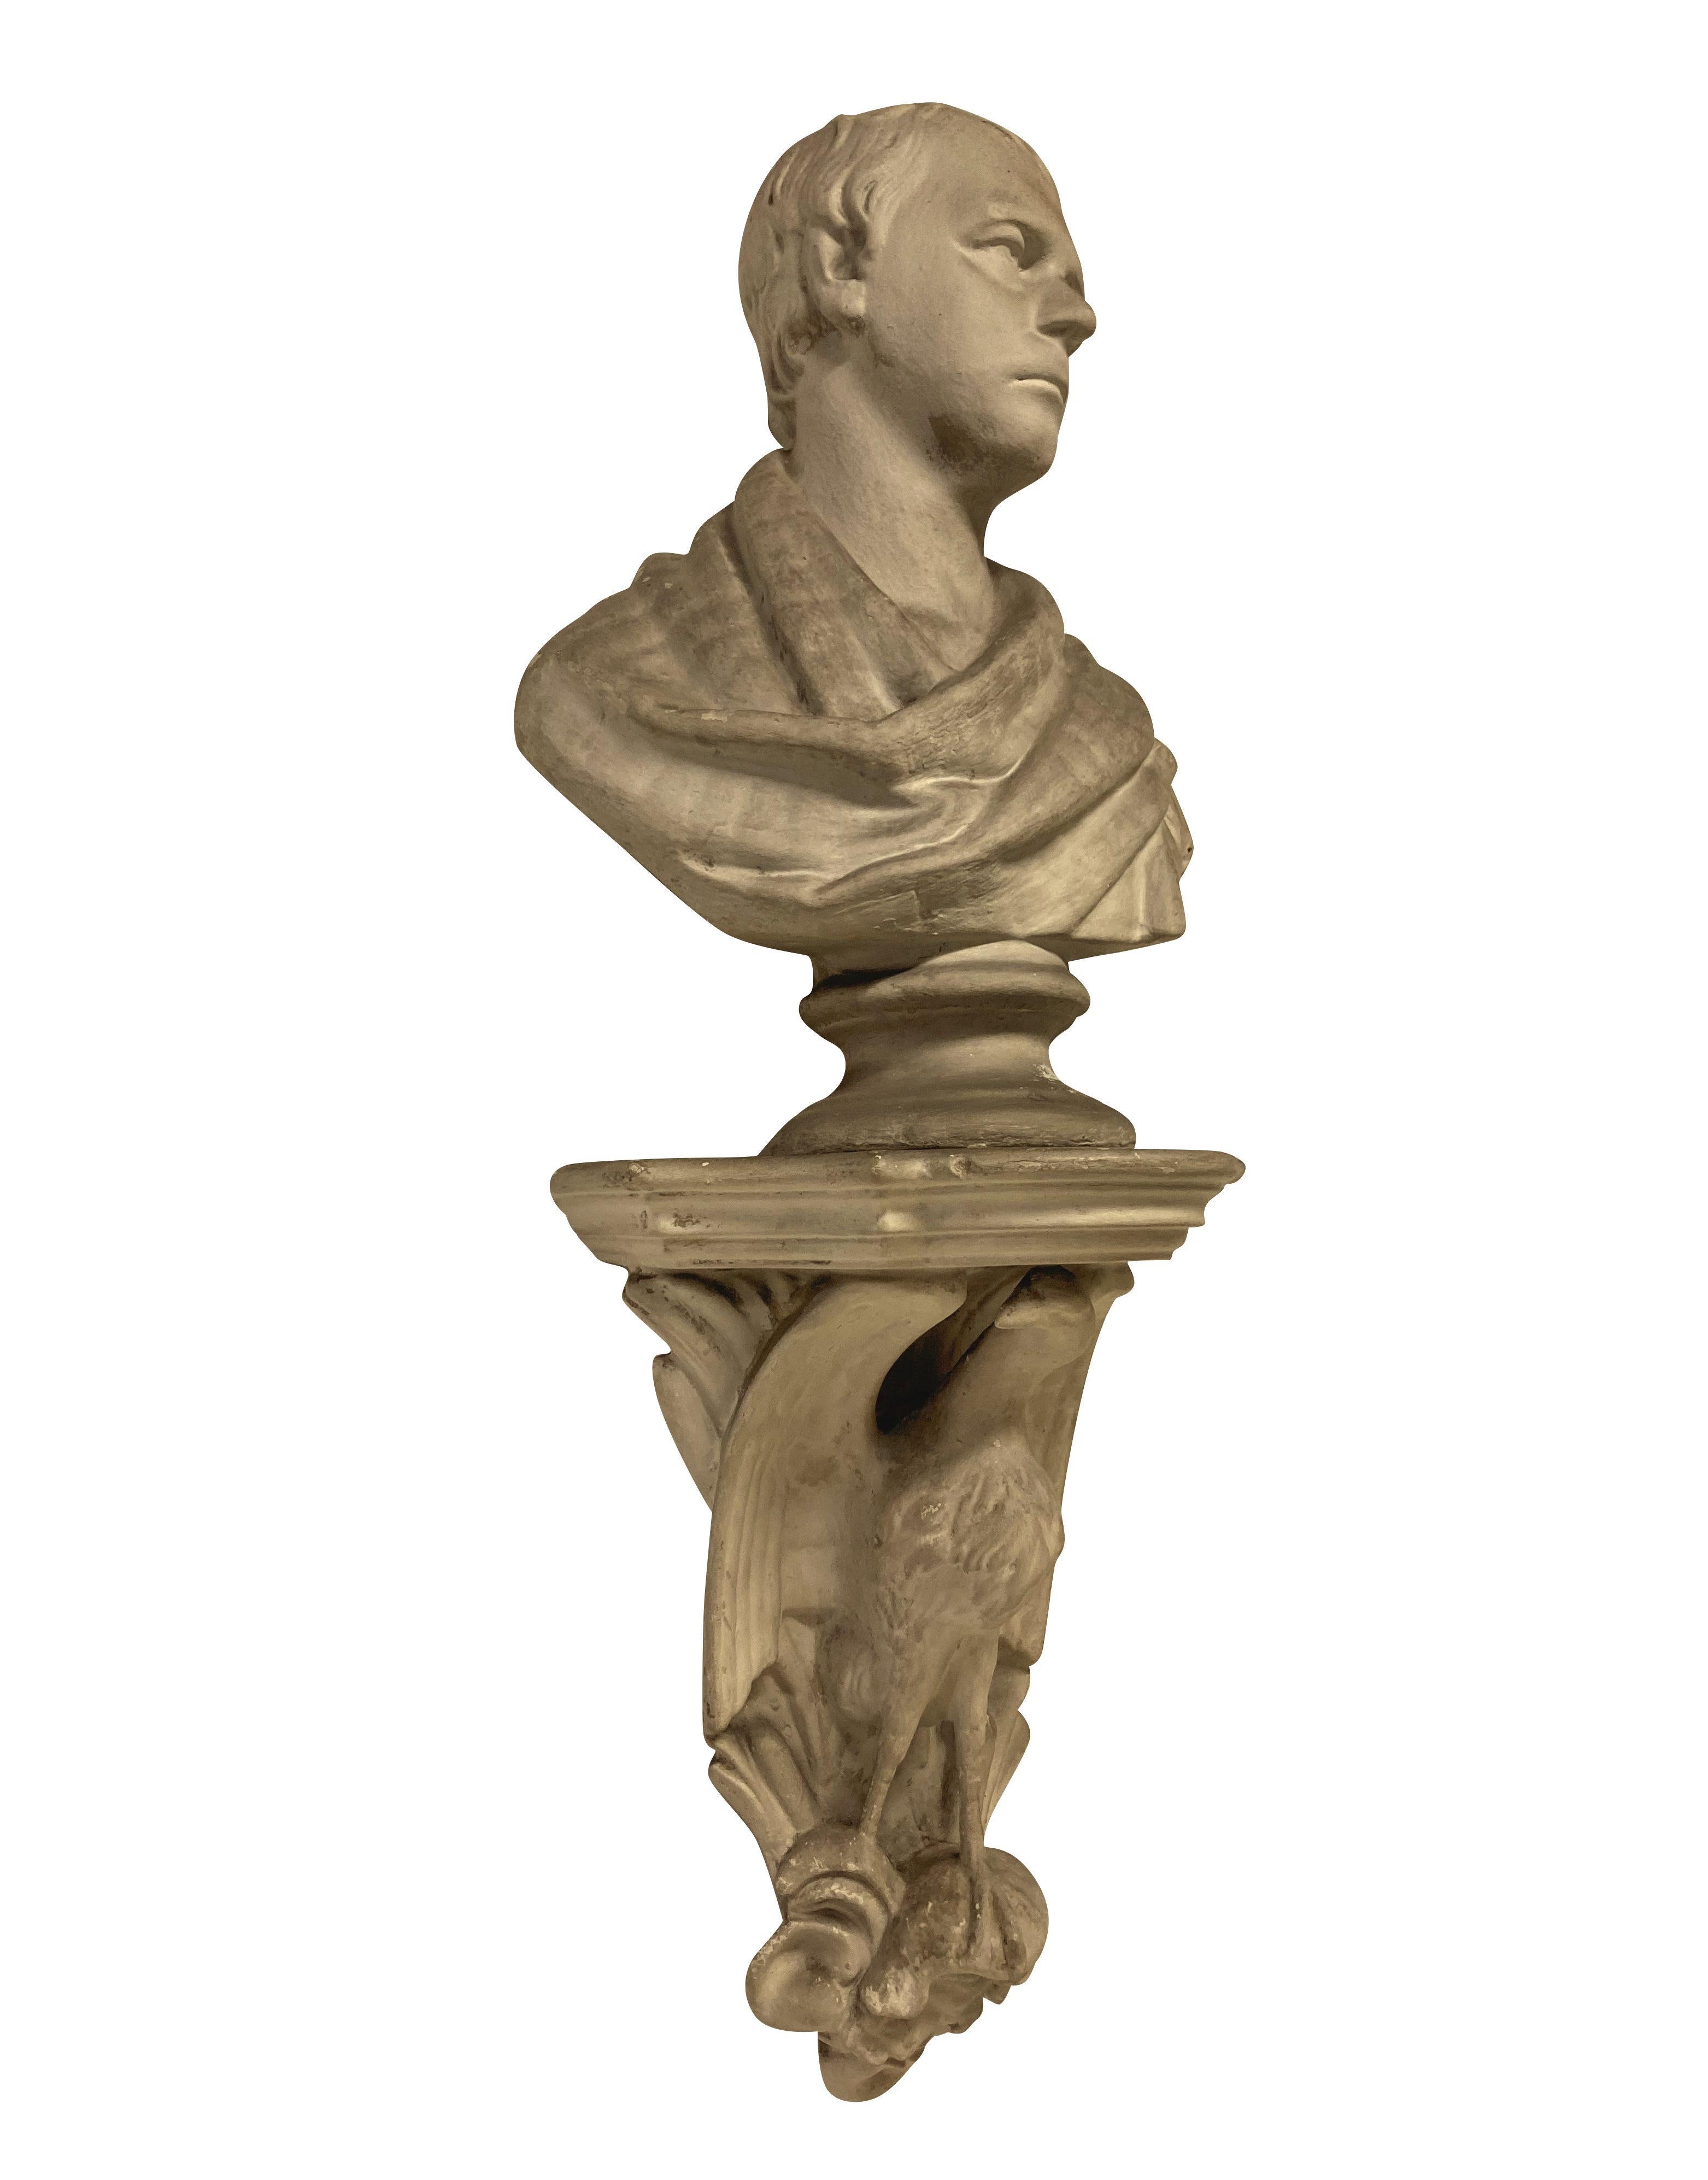 An English Classical plaster library bust of a gentleman in Roman clothing, with a wall bracket depicting a Roman eagle.

Sir Walter Scott after Chantrey.